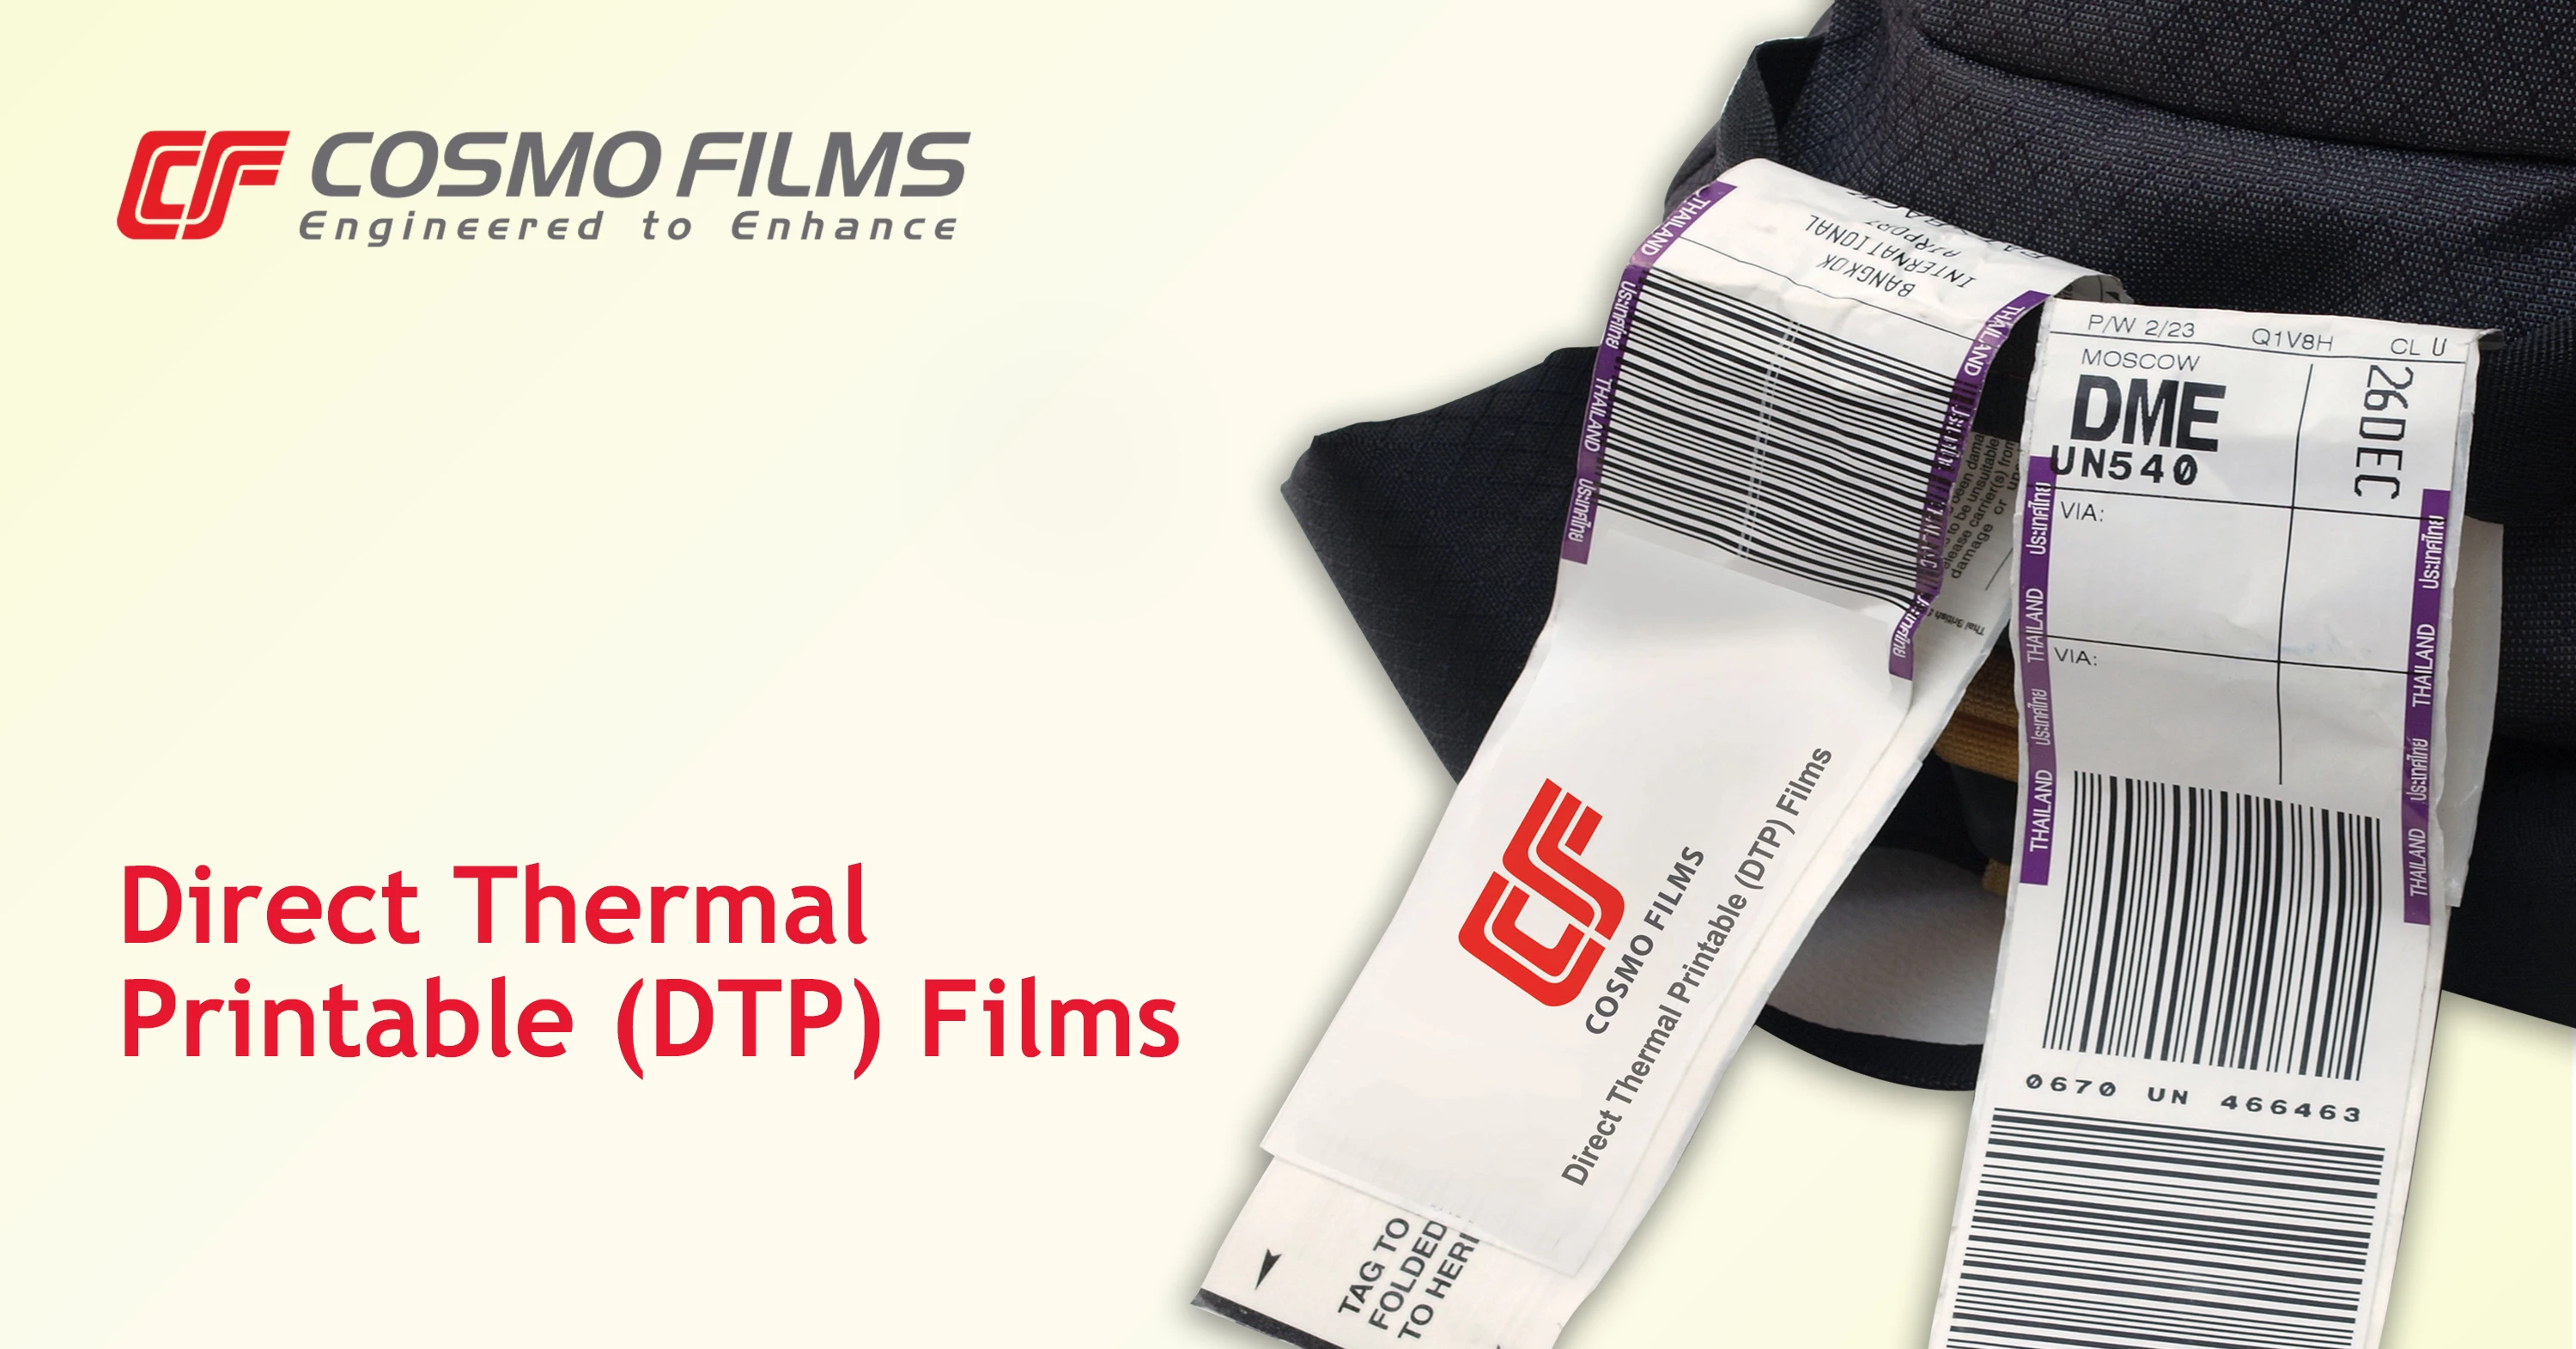 Direct Thermal Printable (DTP) Films – What are they and why do we need them?